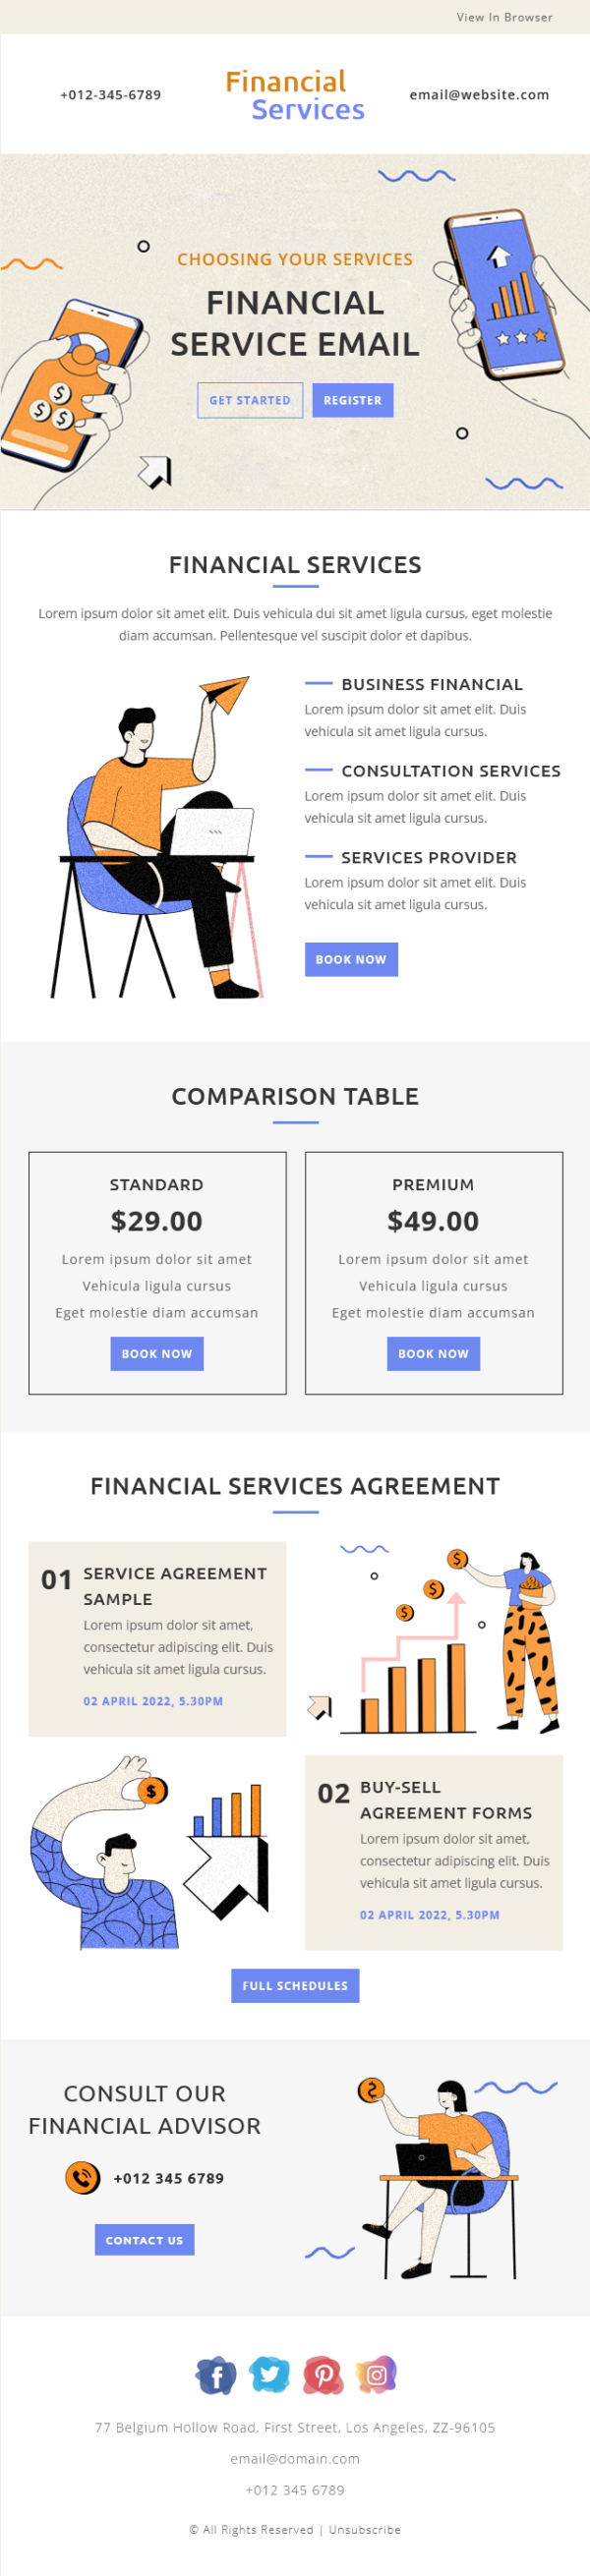 Financial Services - Multipurpose Responsive Email Template